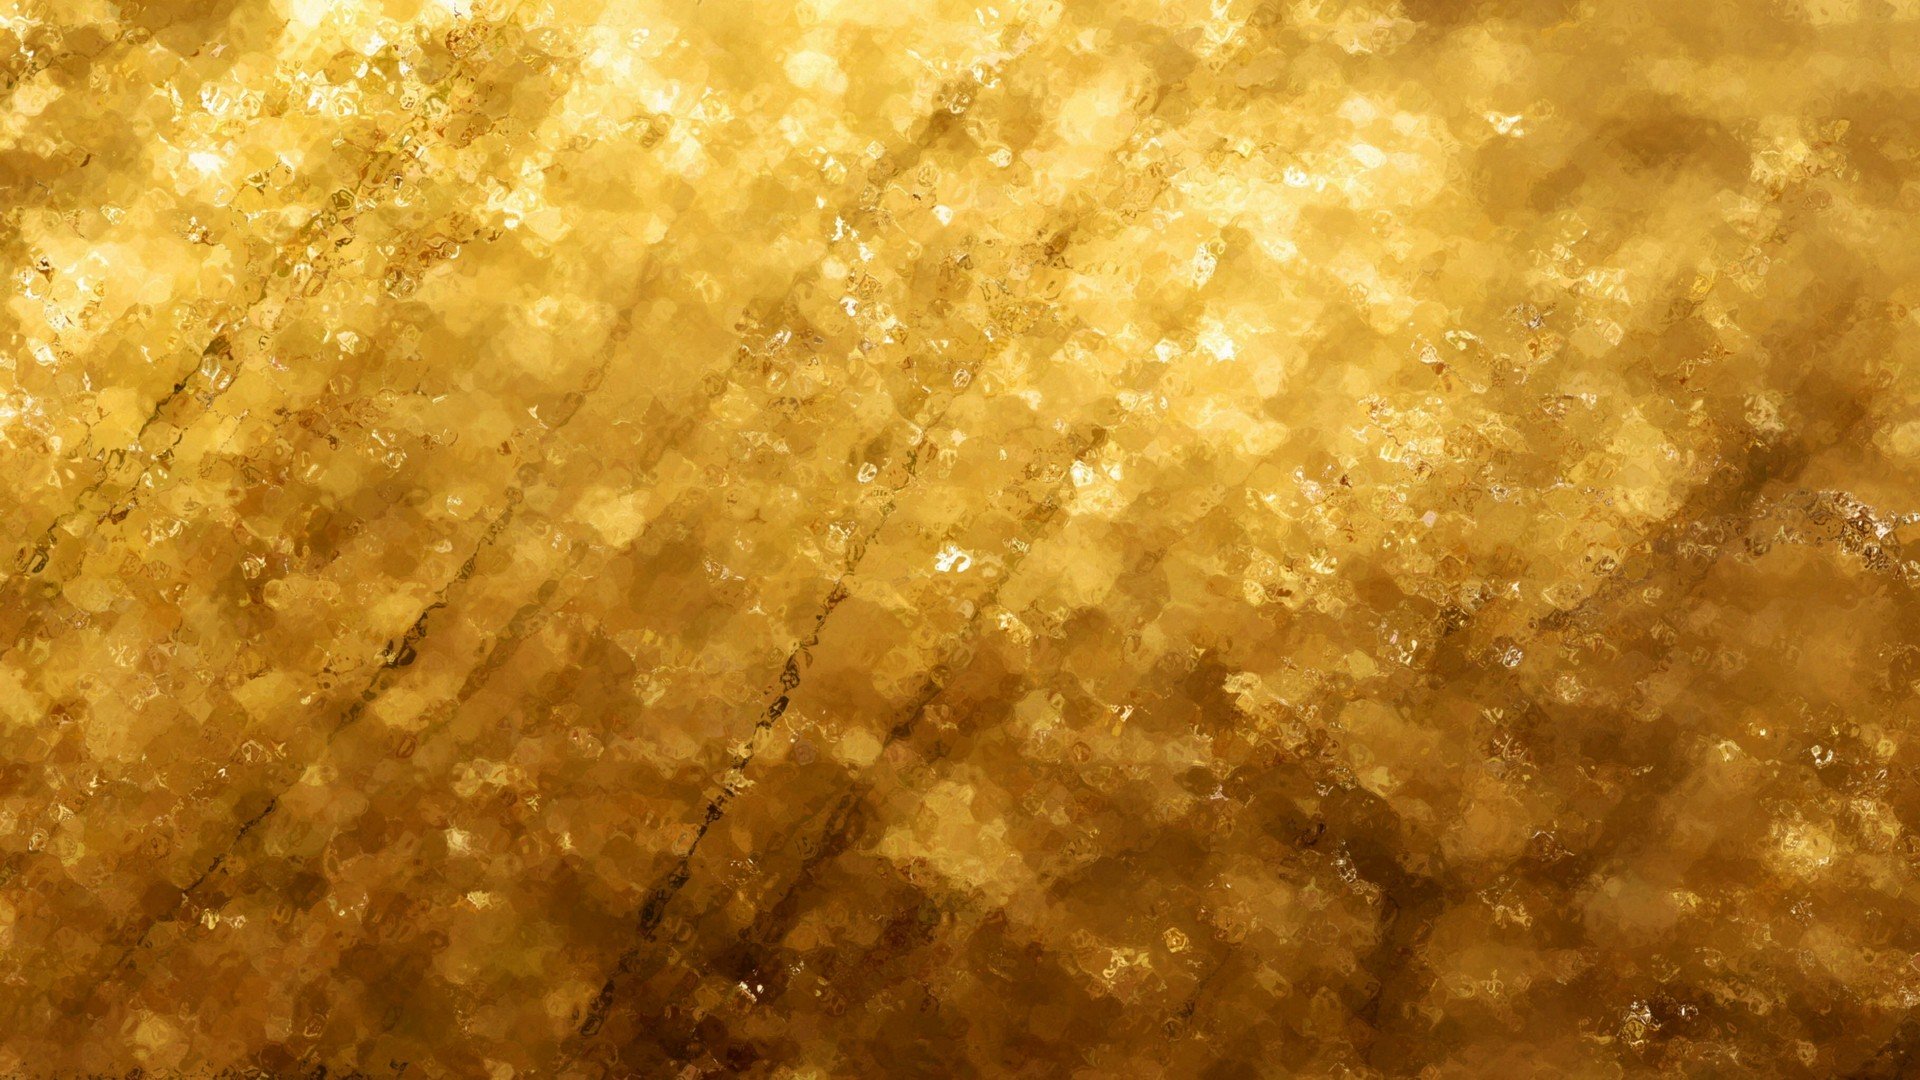 Ments To HD Gold Wallpaper Background For Desktop